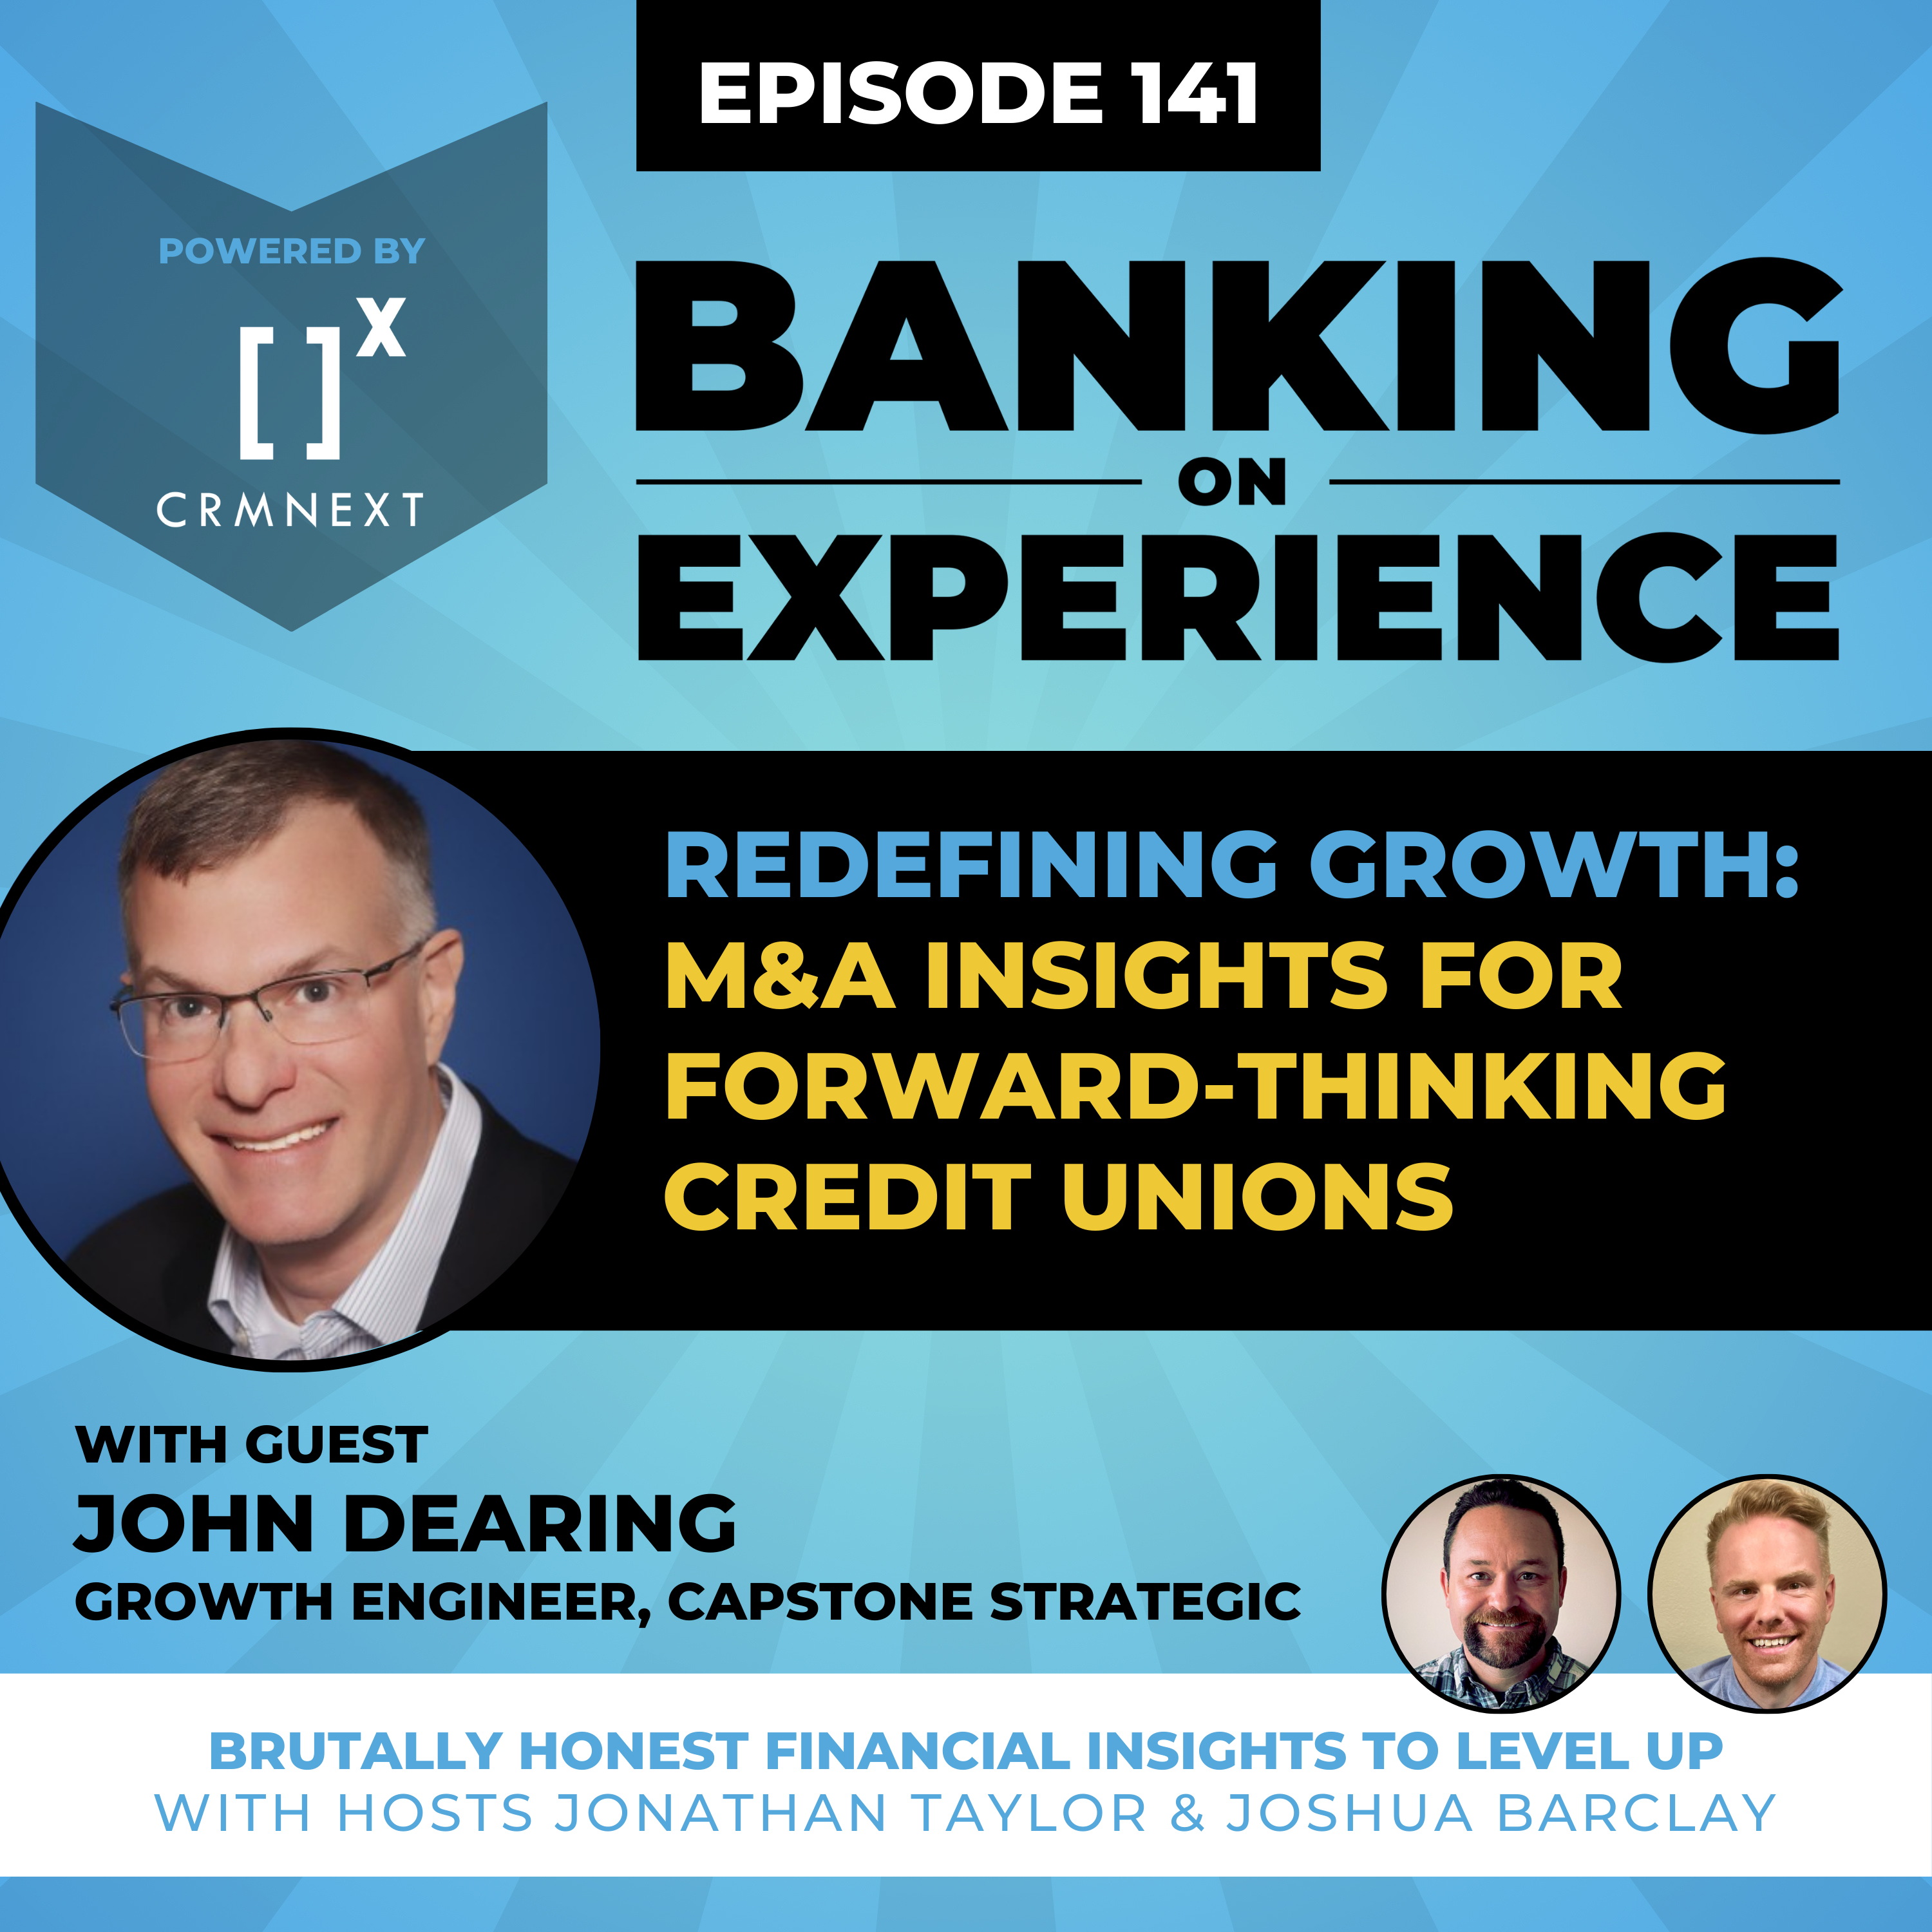 Redefining Growth: M&A Insights for Forward-Thinking Credit Unions